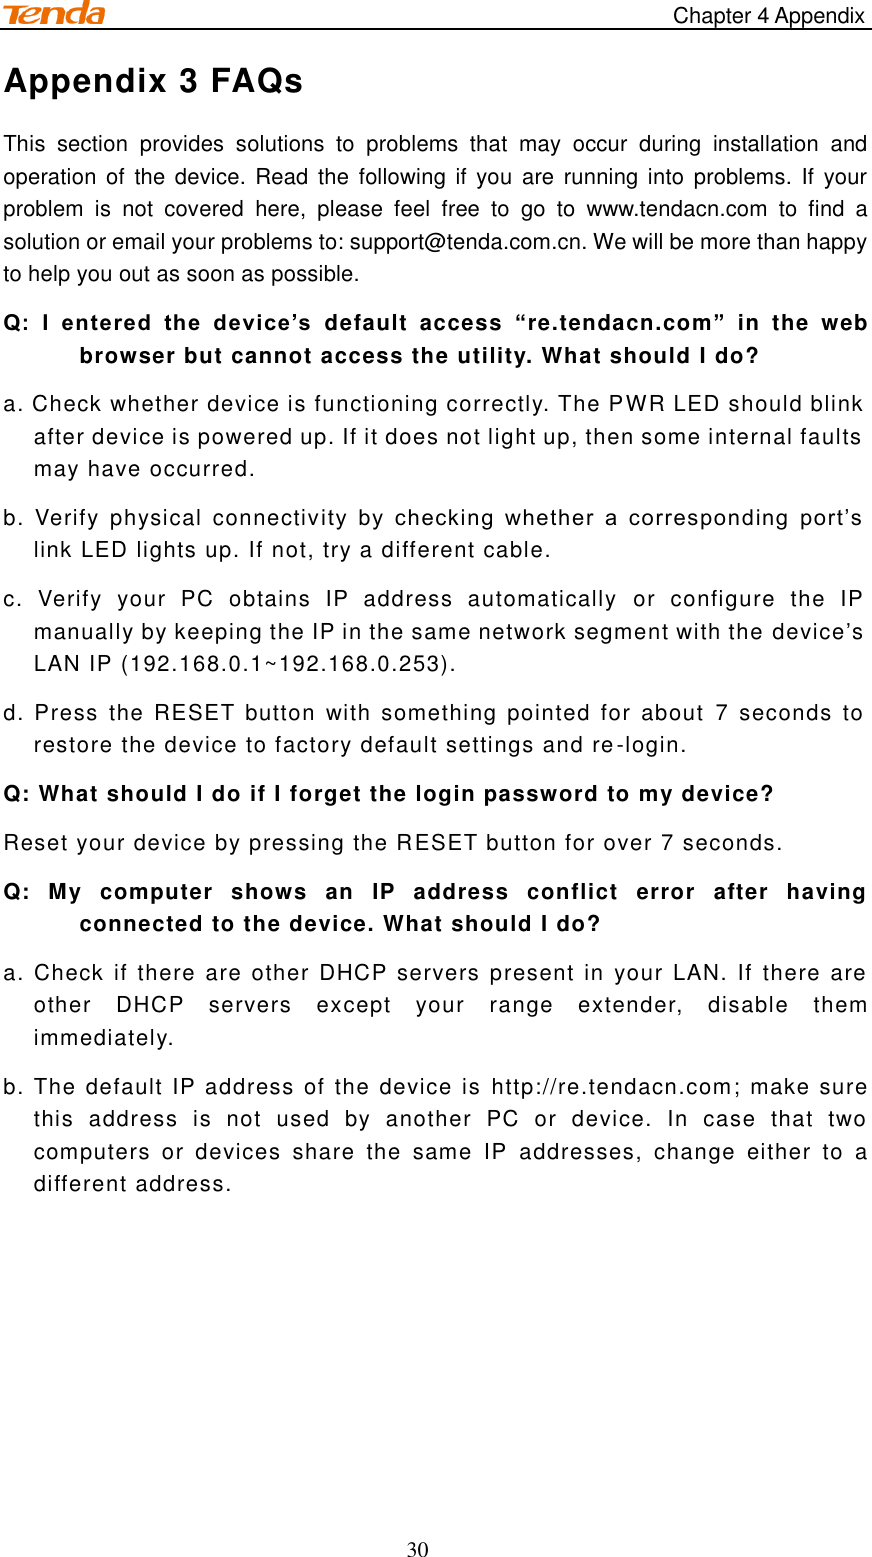                                                                                     Chapter 4 Appendix 30 Appendix 3 FAQs This  section  provides  solutions  to  problems  that  may  occur  during  installation  and operation  of  the  device.  Read  the following if  you are running  into problems.  If  your problem  is  not  covered  here,  please  feel  free  to  go  to  www.tendacn.com  to  find  a solution or email your problems to: support@tenda.com.cn. We will be more than happy to help you out as soon as possible. Q:  I  entered  the  device’s  default  access  “re.tendacn.com”  in  the  web browser but cannot access the utility. What should I do? a. Check whether device is functioning correctly. The PWR LED should blink after device is powered up. If it does not light up, then some internal faults may have occurred. b.  Verify  physical  connectivity  by  checking  whether  a  corresponding  port’s link LED lights up. If not, try a different cable.   c.  Verify  your  PC  obtains  IP  address  automatically  or  configure  the  IP manually by keeping the IP in the same network segment with the device’s LAN IP (192.168.0.1~192.168.0.253). d. Press  the  RESET  button  with  something pointed  for  about  7  seconds  to restore the device to factory default settings and re-login. Q: What should I do if I forget the login password to my device? Reset your device by pressing the RESET button for over 7 seconds. Q:  My  computer  shows  an  IP  address  conflict  error  after  having connected to the device. What should I do? a. Check if there  are other DHCP  servers present in  your  LAN. If  there are other  DHCP  servers  except  your  range  extender,  disable  them immediately. b. The default IP address of the device is http://re.tendacn.com; make sure this  address  is  not  used  by  another  PC  or  device.  In  case  that  two computers  or  devices  share  the  same  IP  addresses,  change  either  to  a different address.    